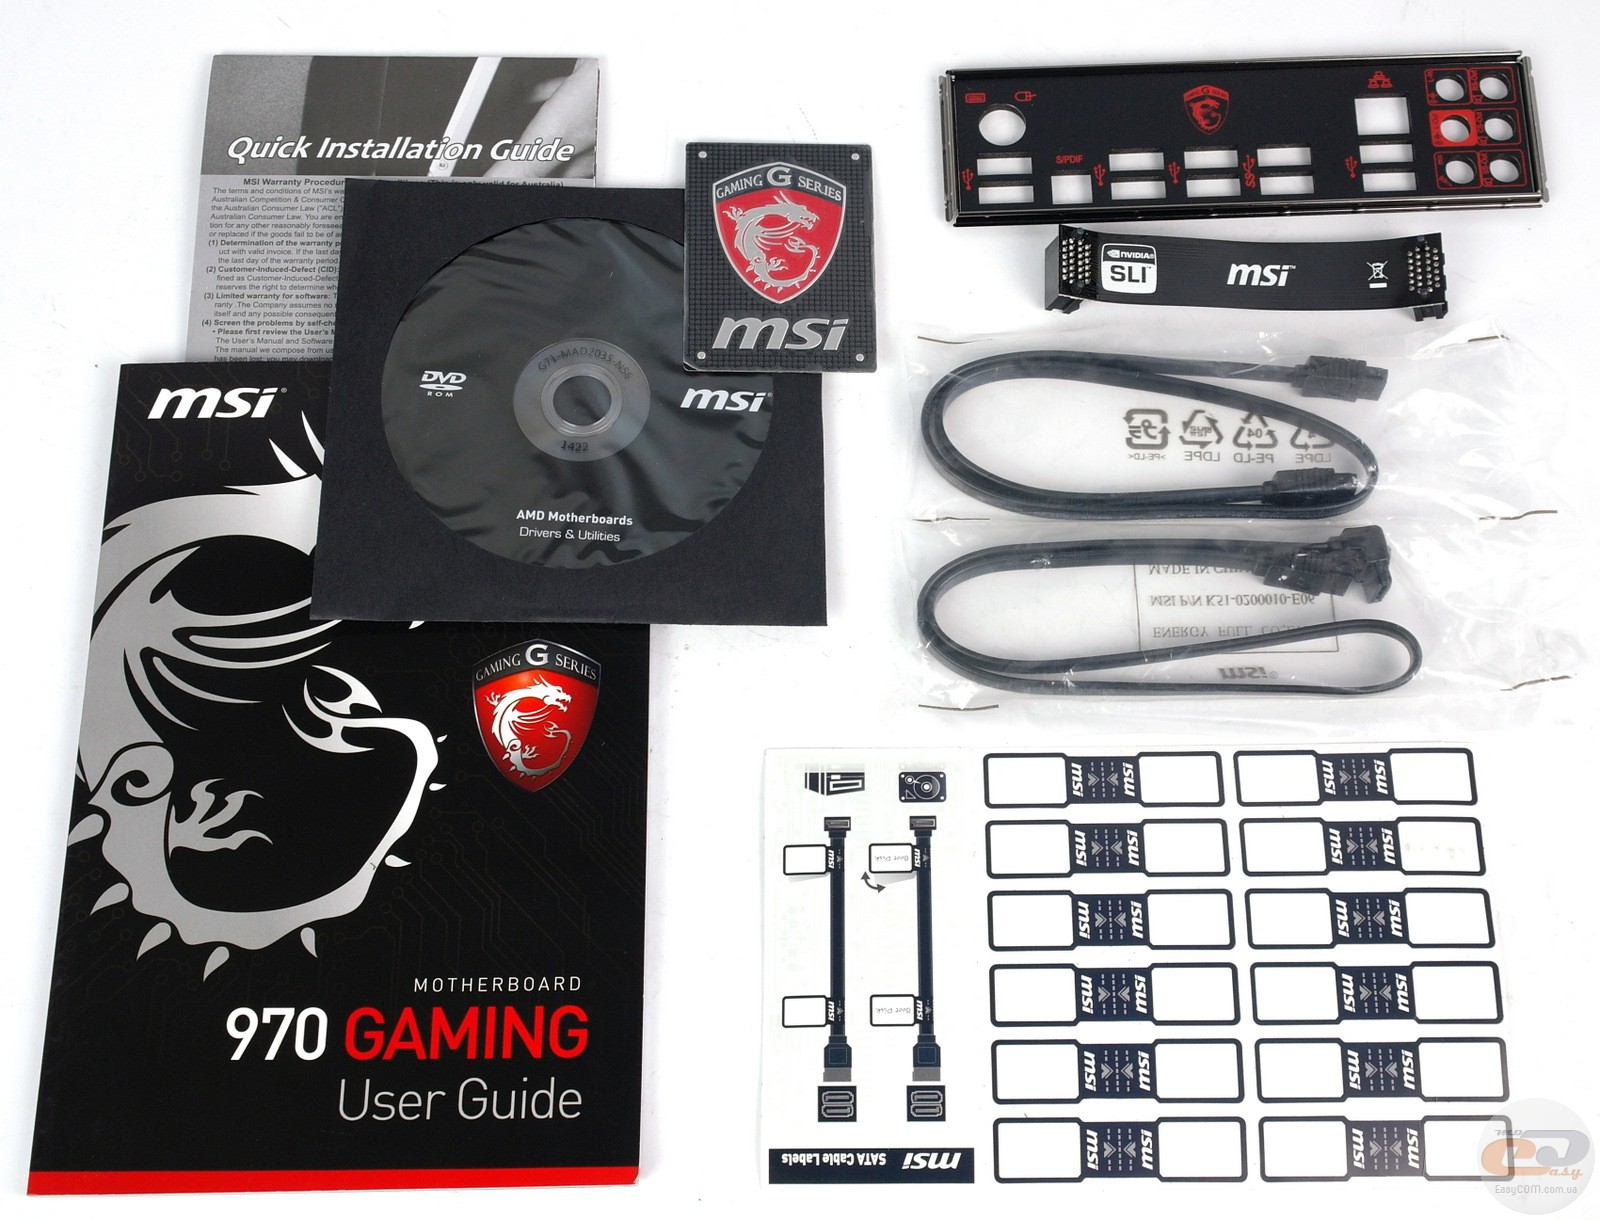 MSI 970 GAMING motherboard review and testing. GECID.com